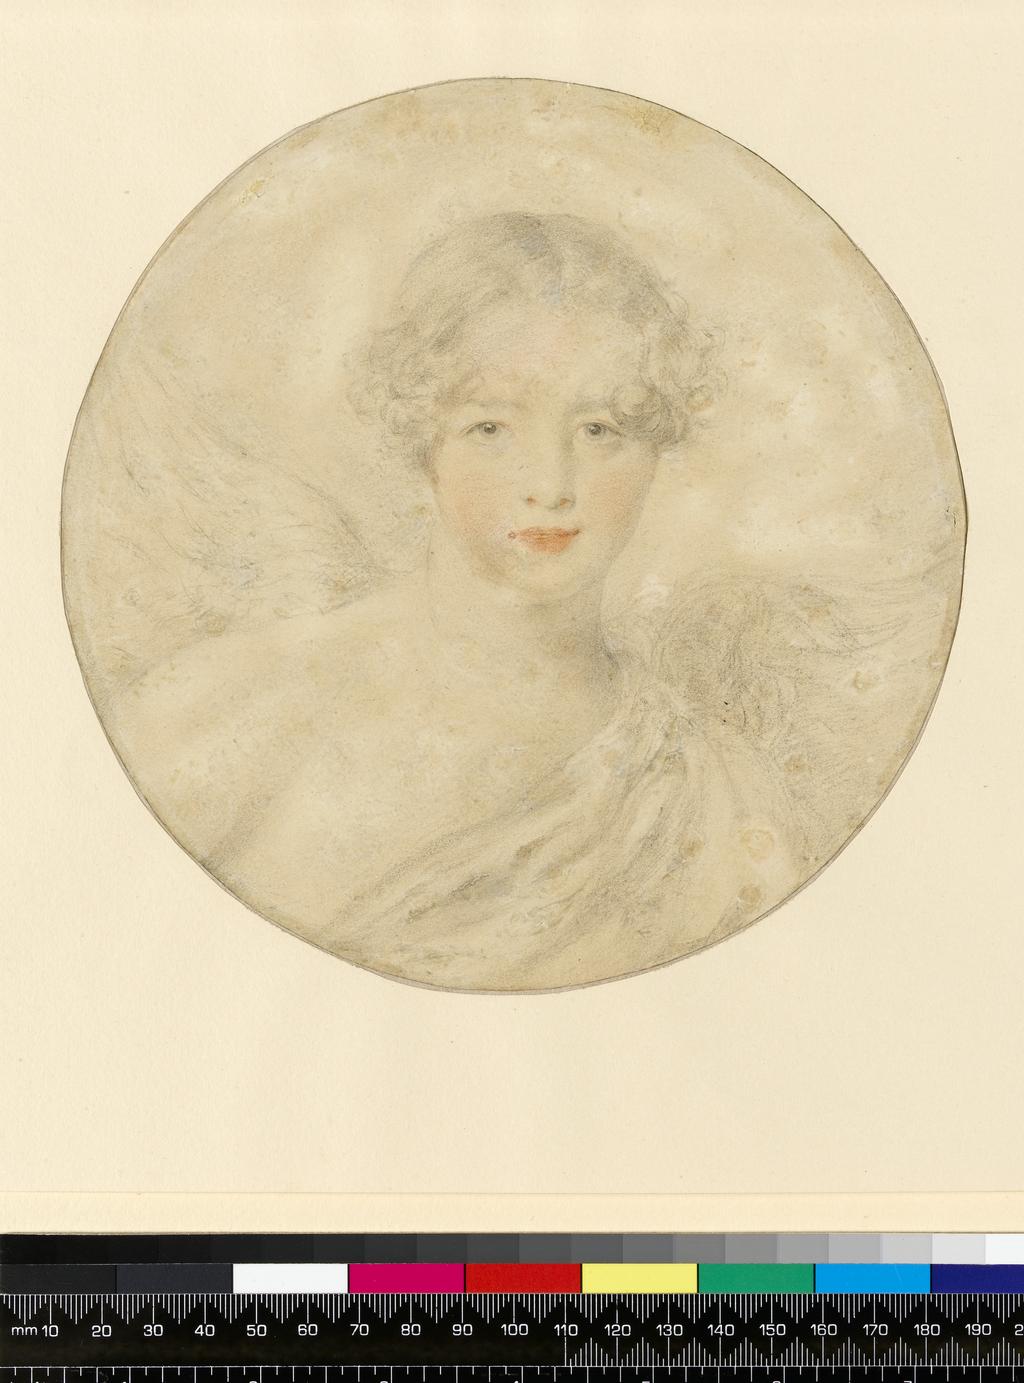 An image of Portrait of Cassandra Isabella Barwick. Lawrence, Thomas (British, 1769-1830). Graphite with some red chalk at lips, nostrils, cheeks and around eyelids, on paper, diameter 178 mm, circa 1820.